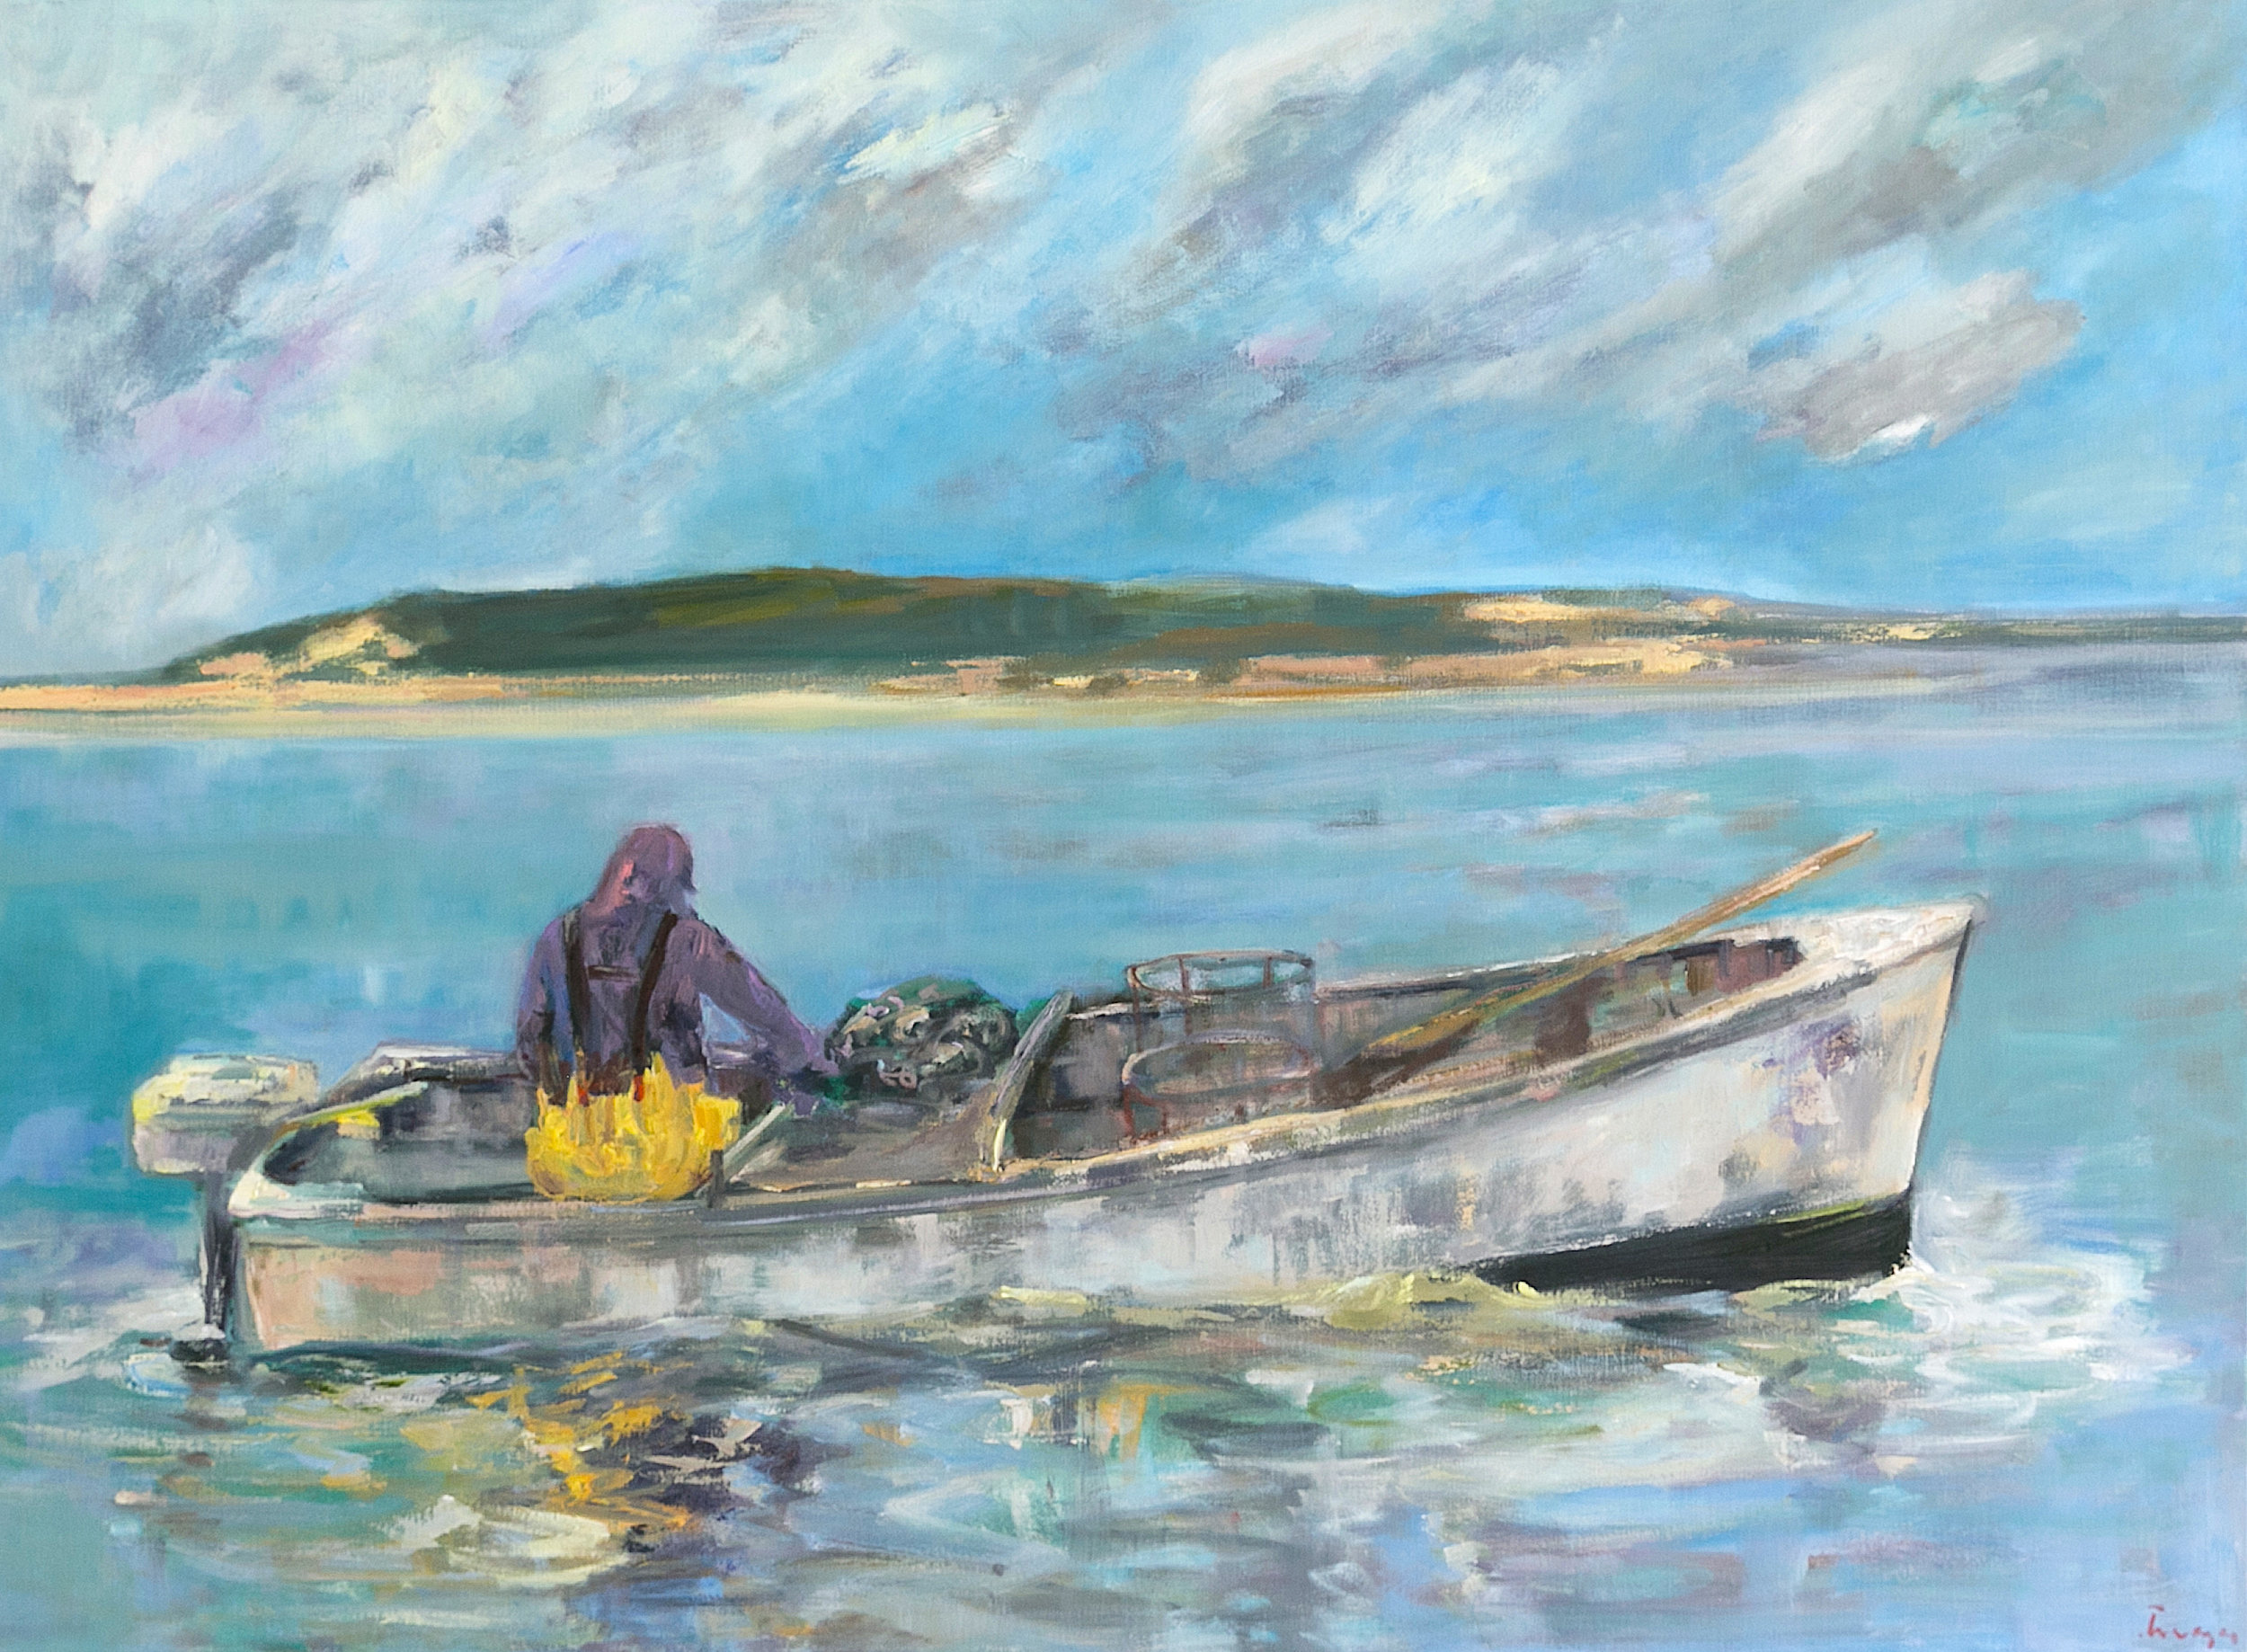 loading the boat 36x48 oil on canvas.jpg